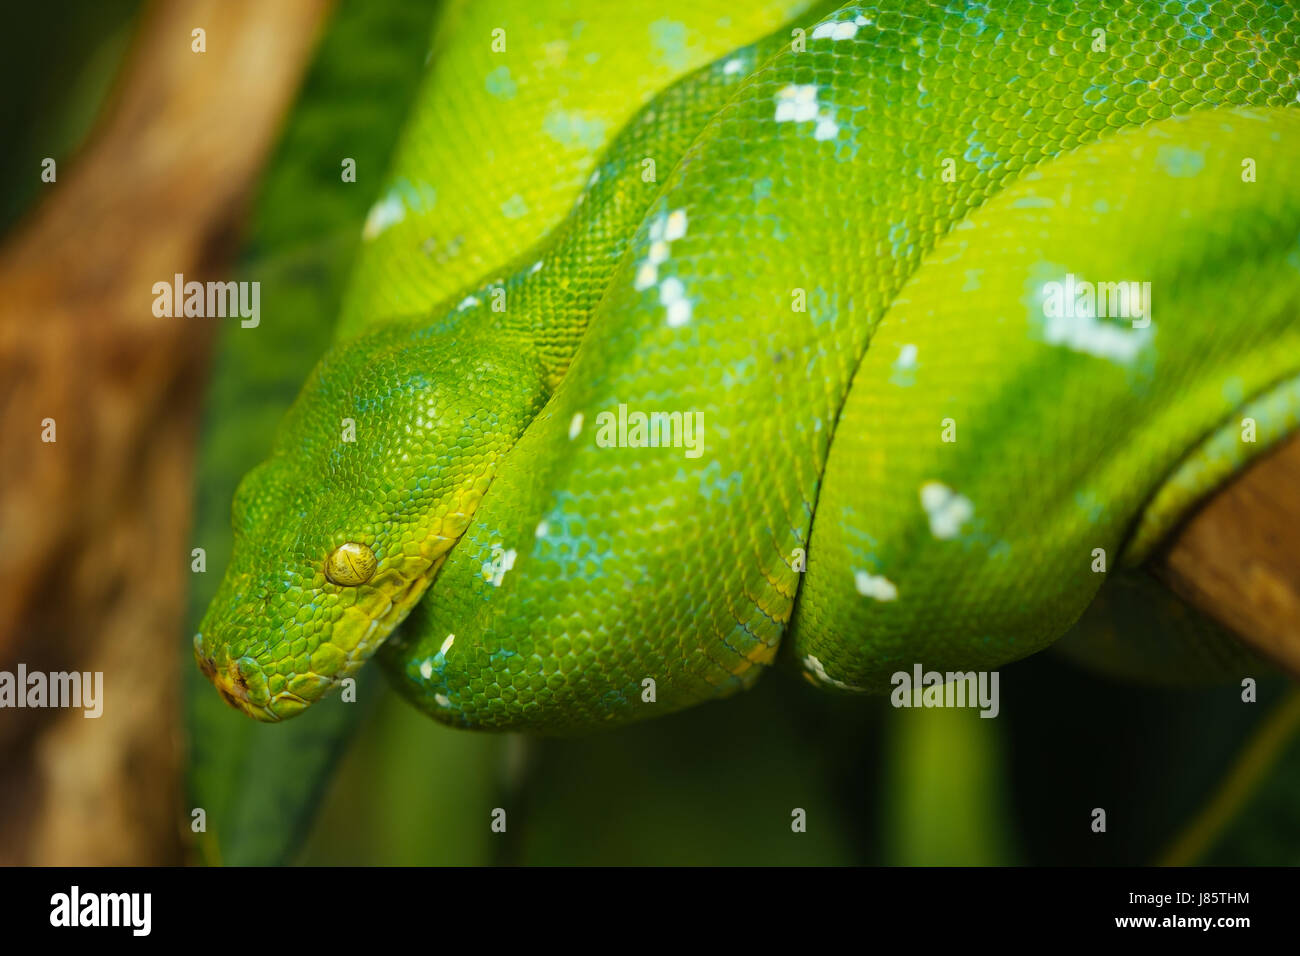 Green Tree python Banque D'Images